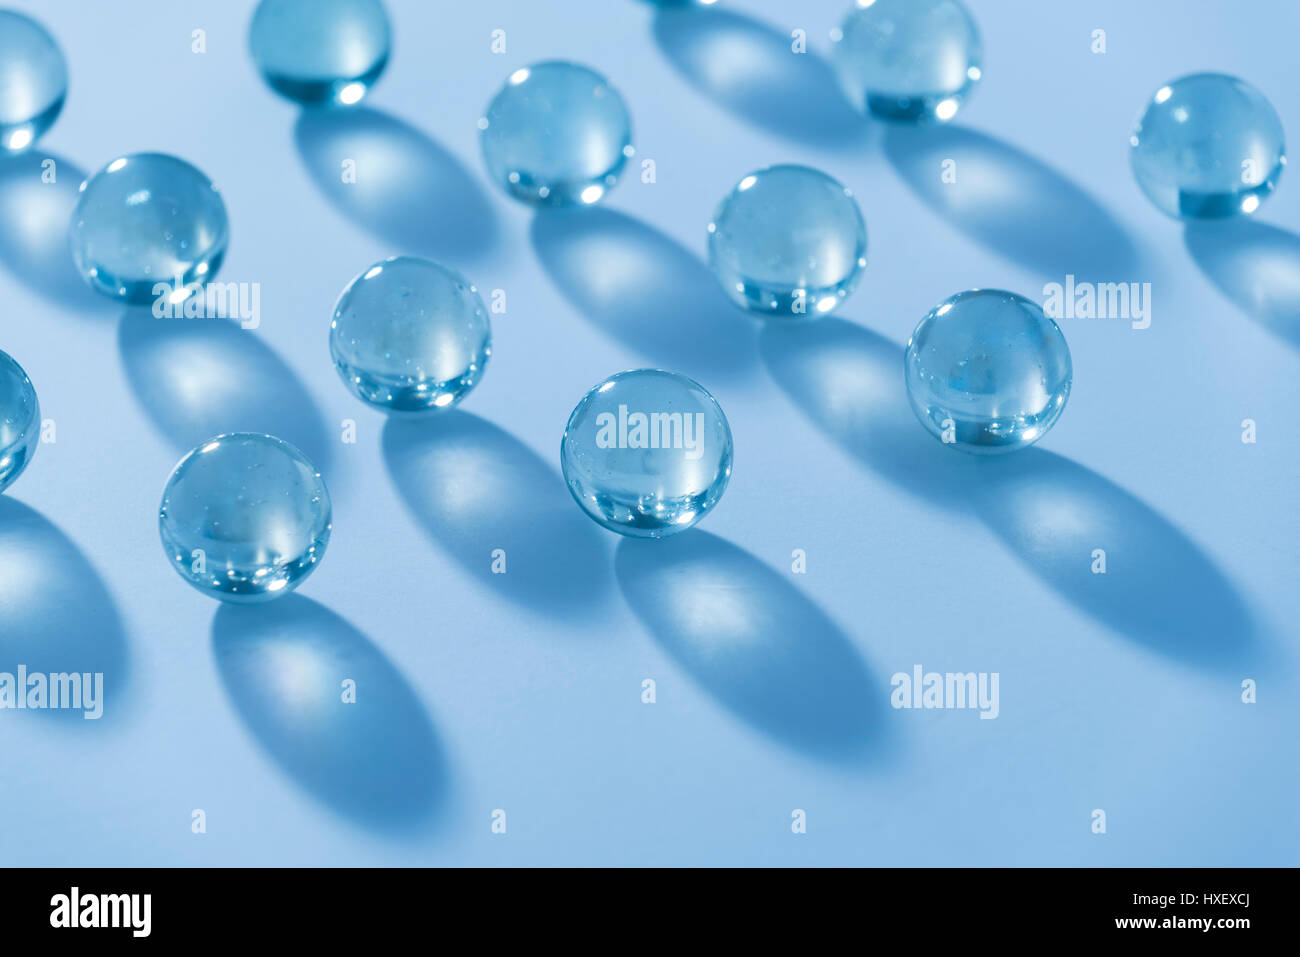 Clear glass marbles on a white surface bathed in a blue light Stock Photo